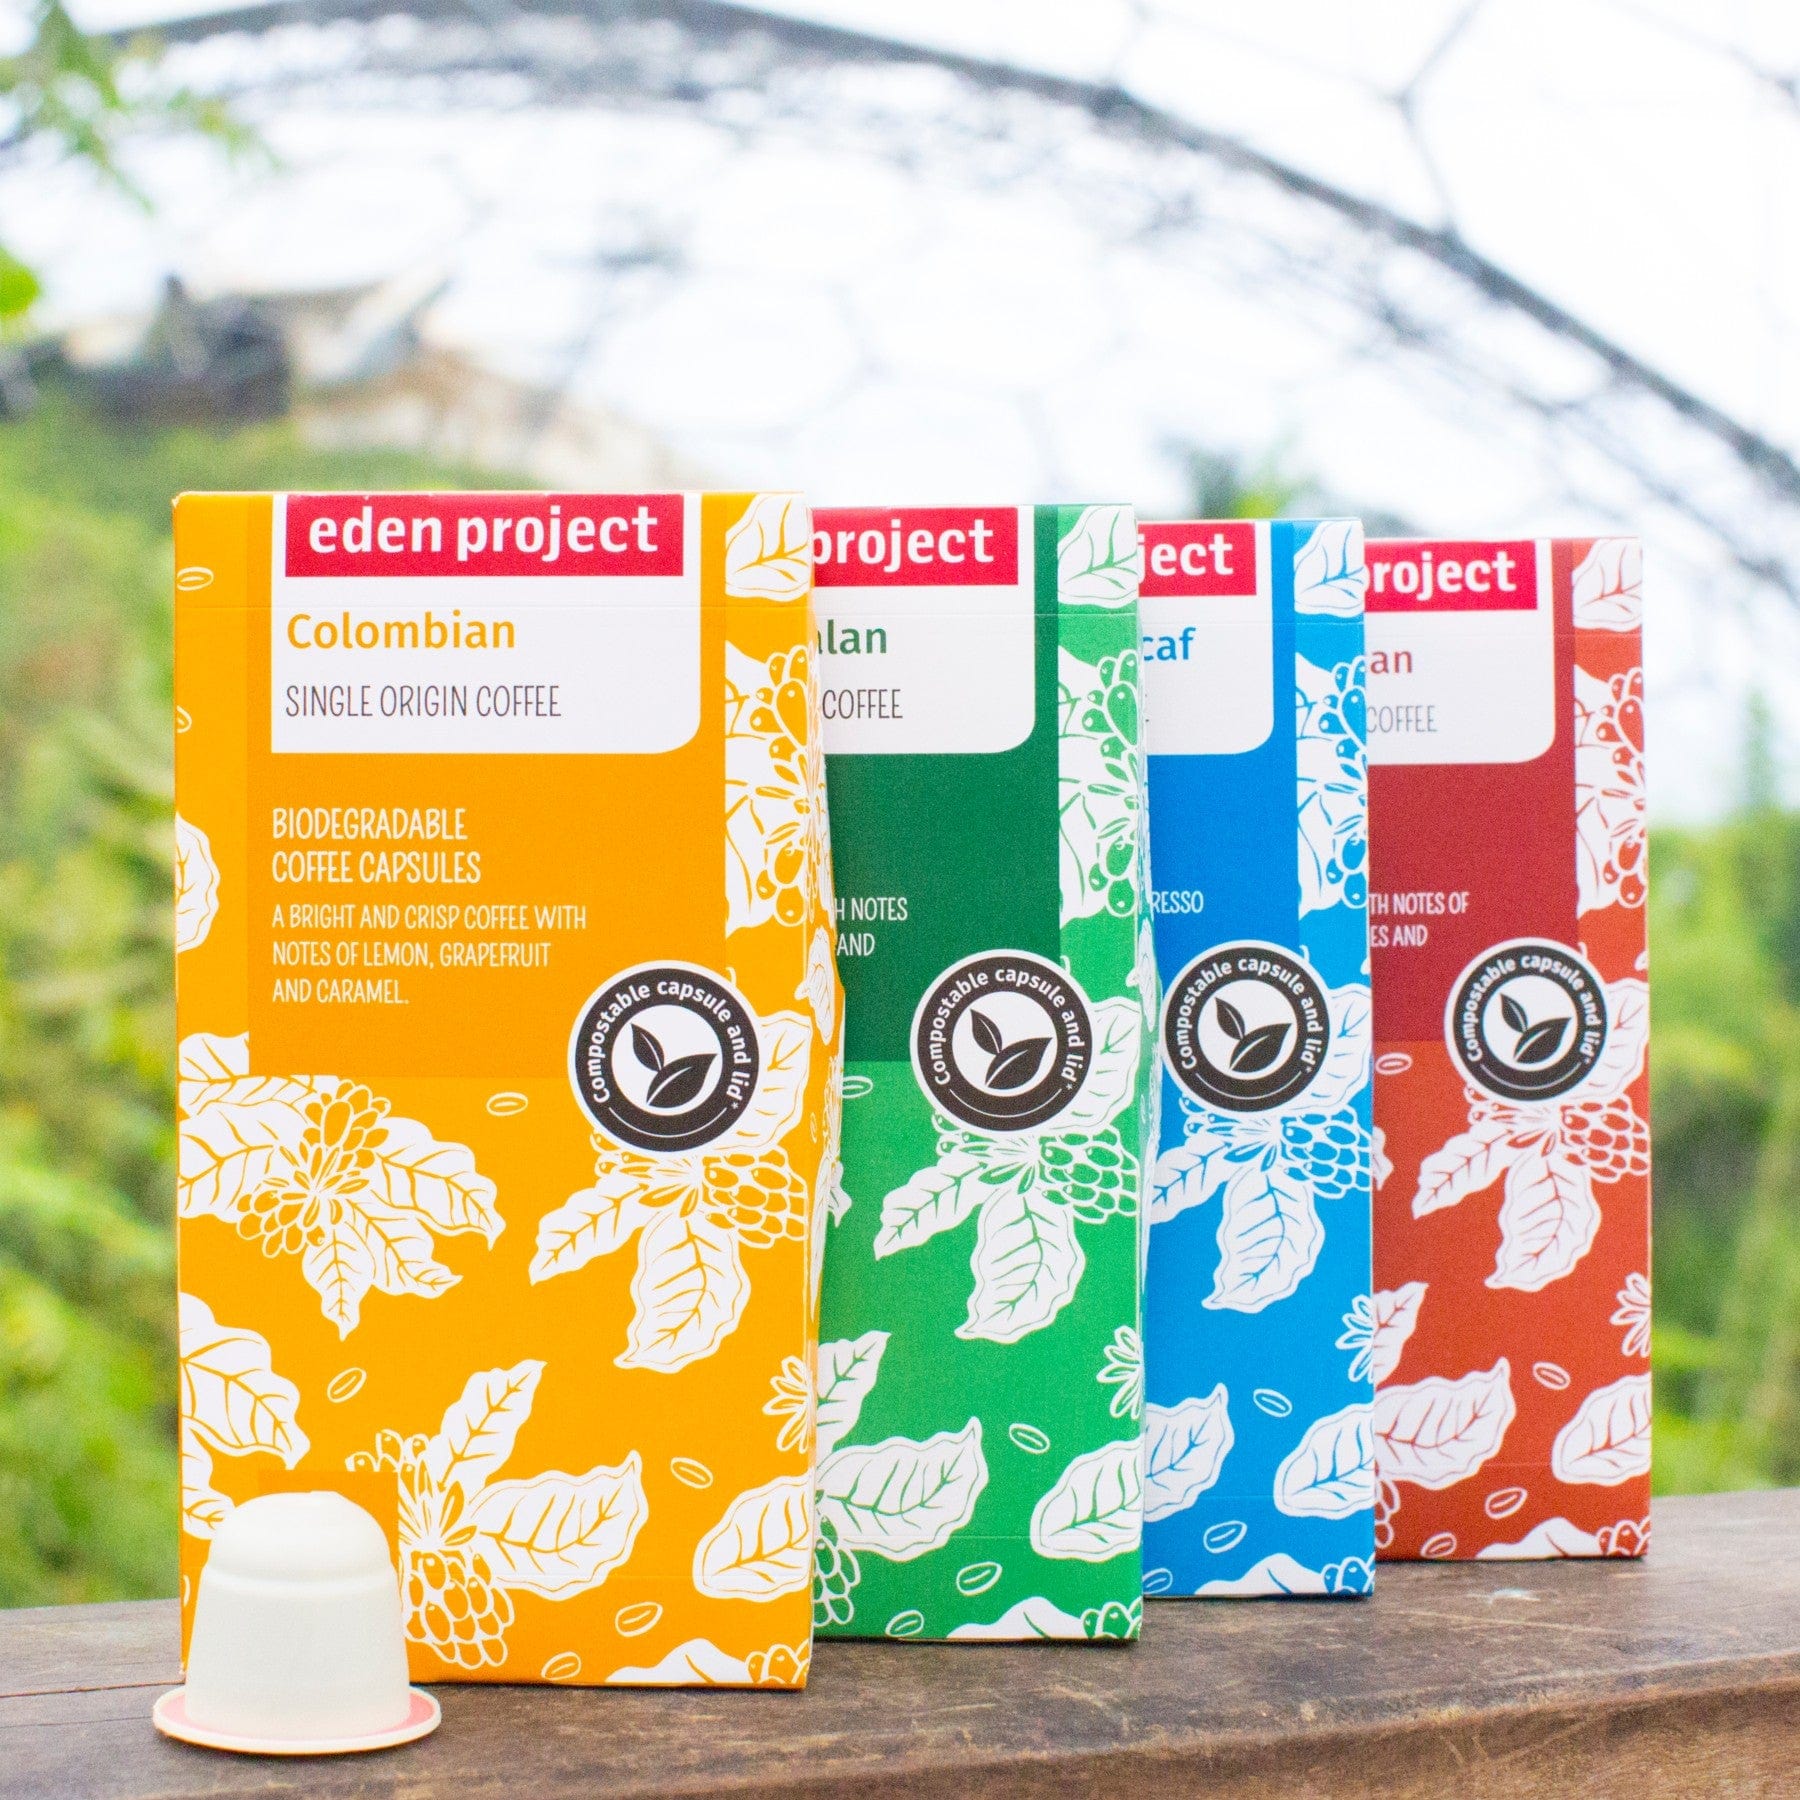 Biodegradable coffee capsules by Eden Project with Colombian, Guatemalan, and Decaf varieties, colorful packaging design, sustainable single-origin coffee, outdoor background.